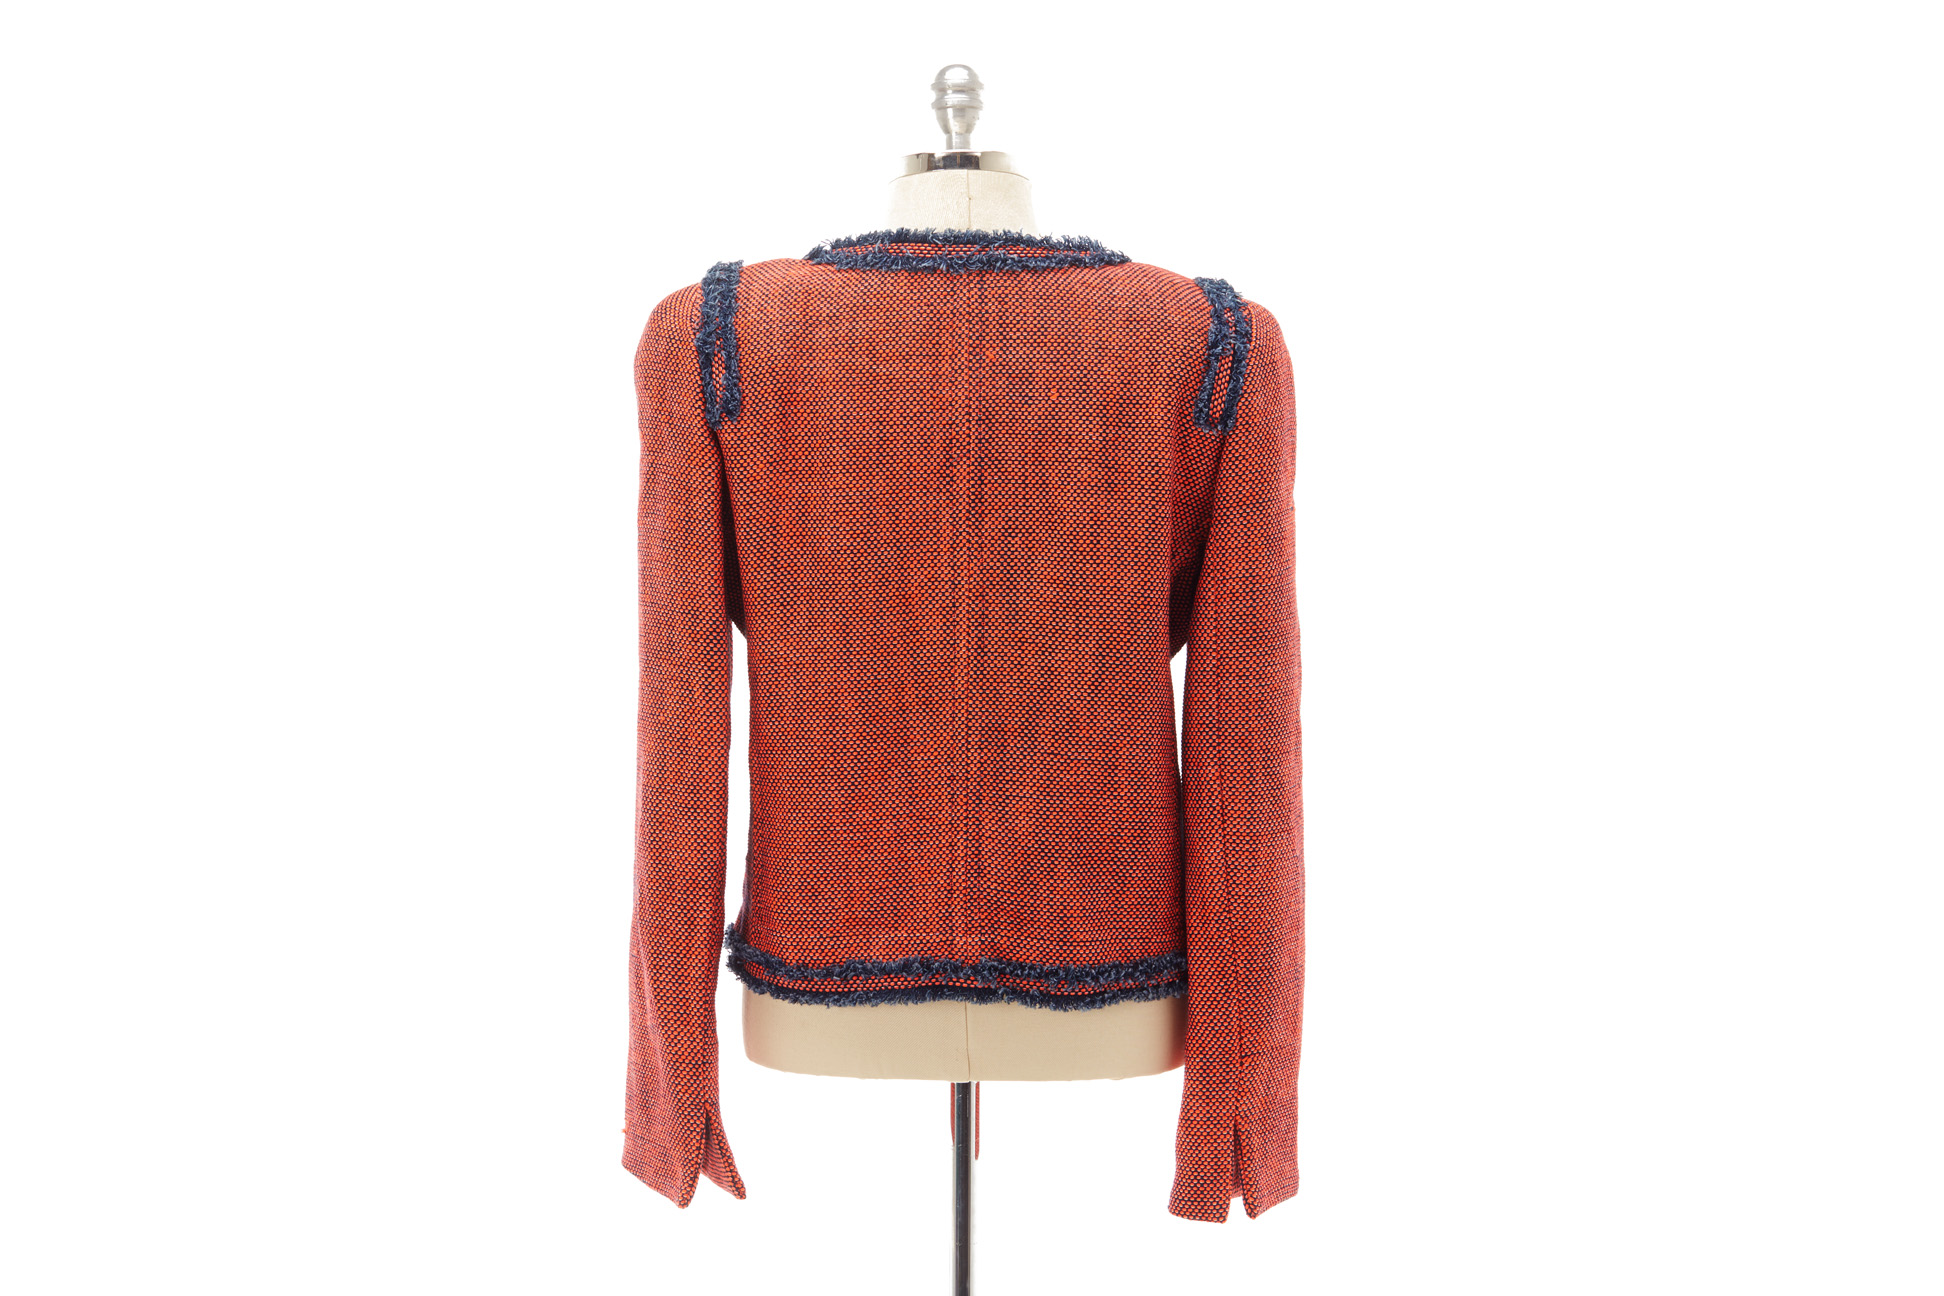 A WEILL RED TWEED JACKET - Image 3 of 3